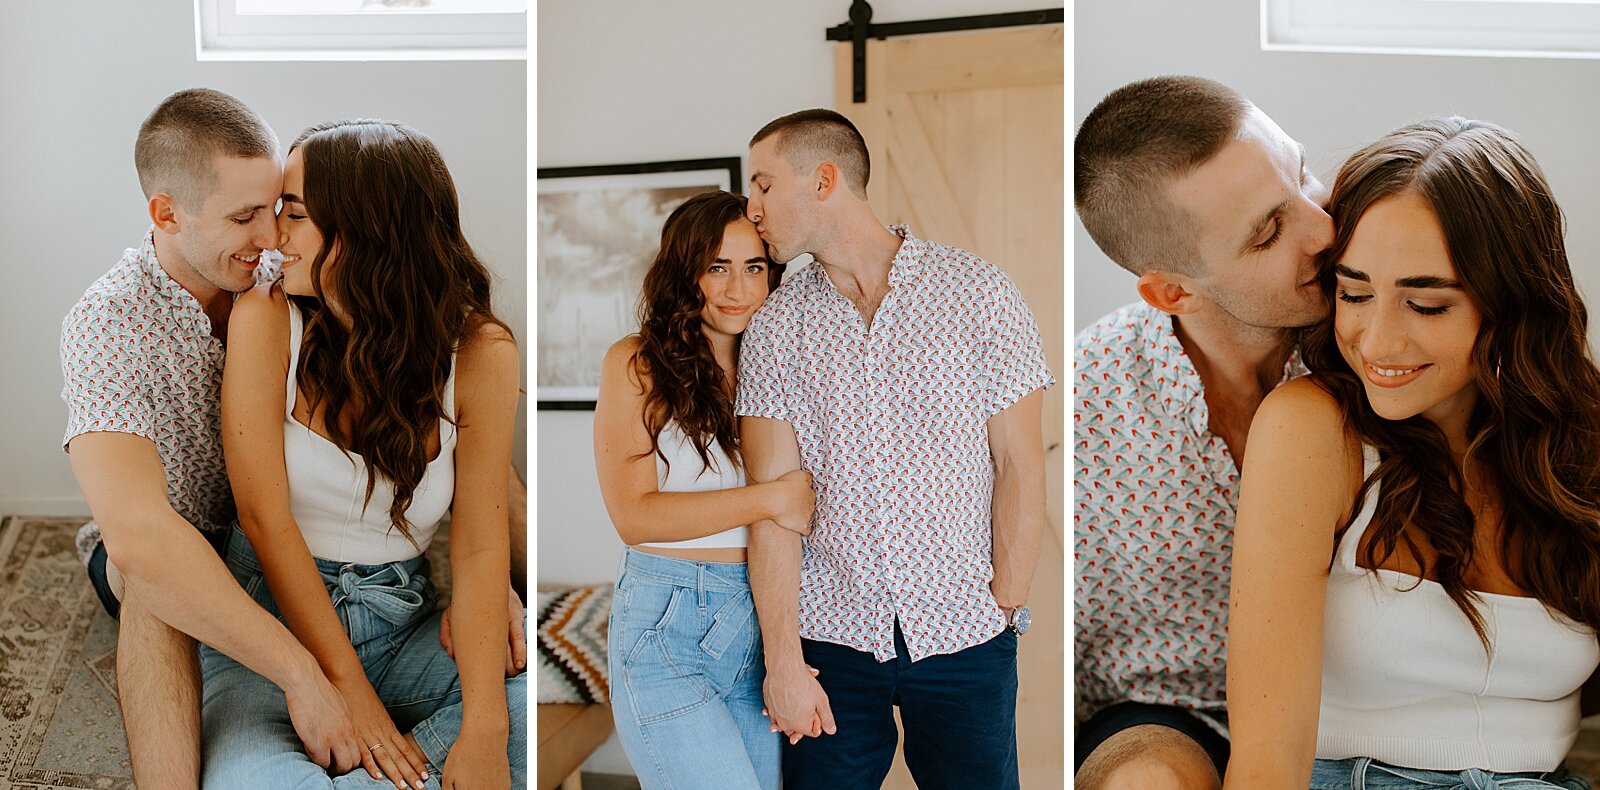 Joshua Tree In Home Engagement Photography by Carmen Lopez